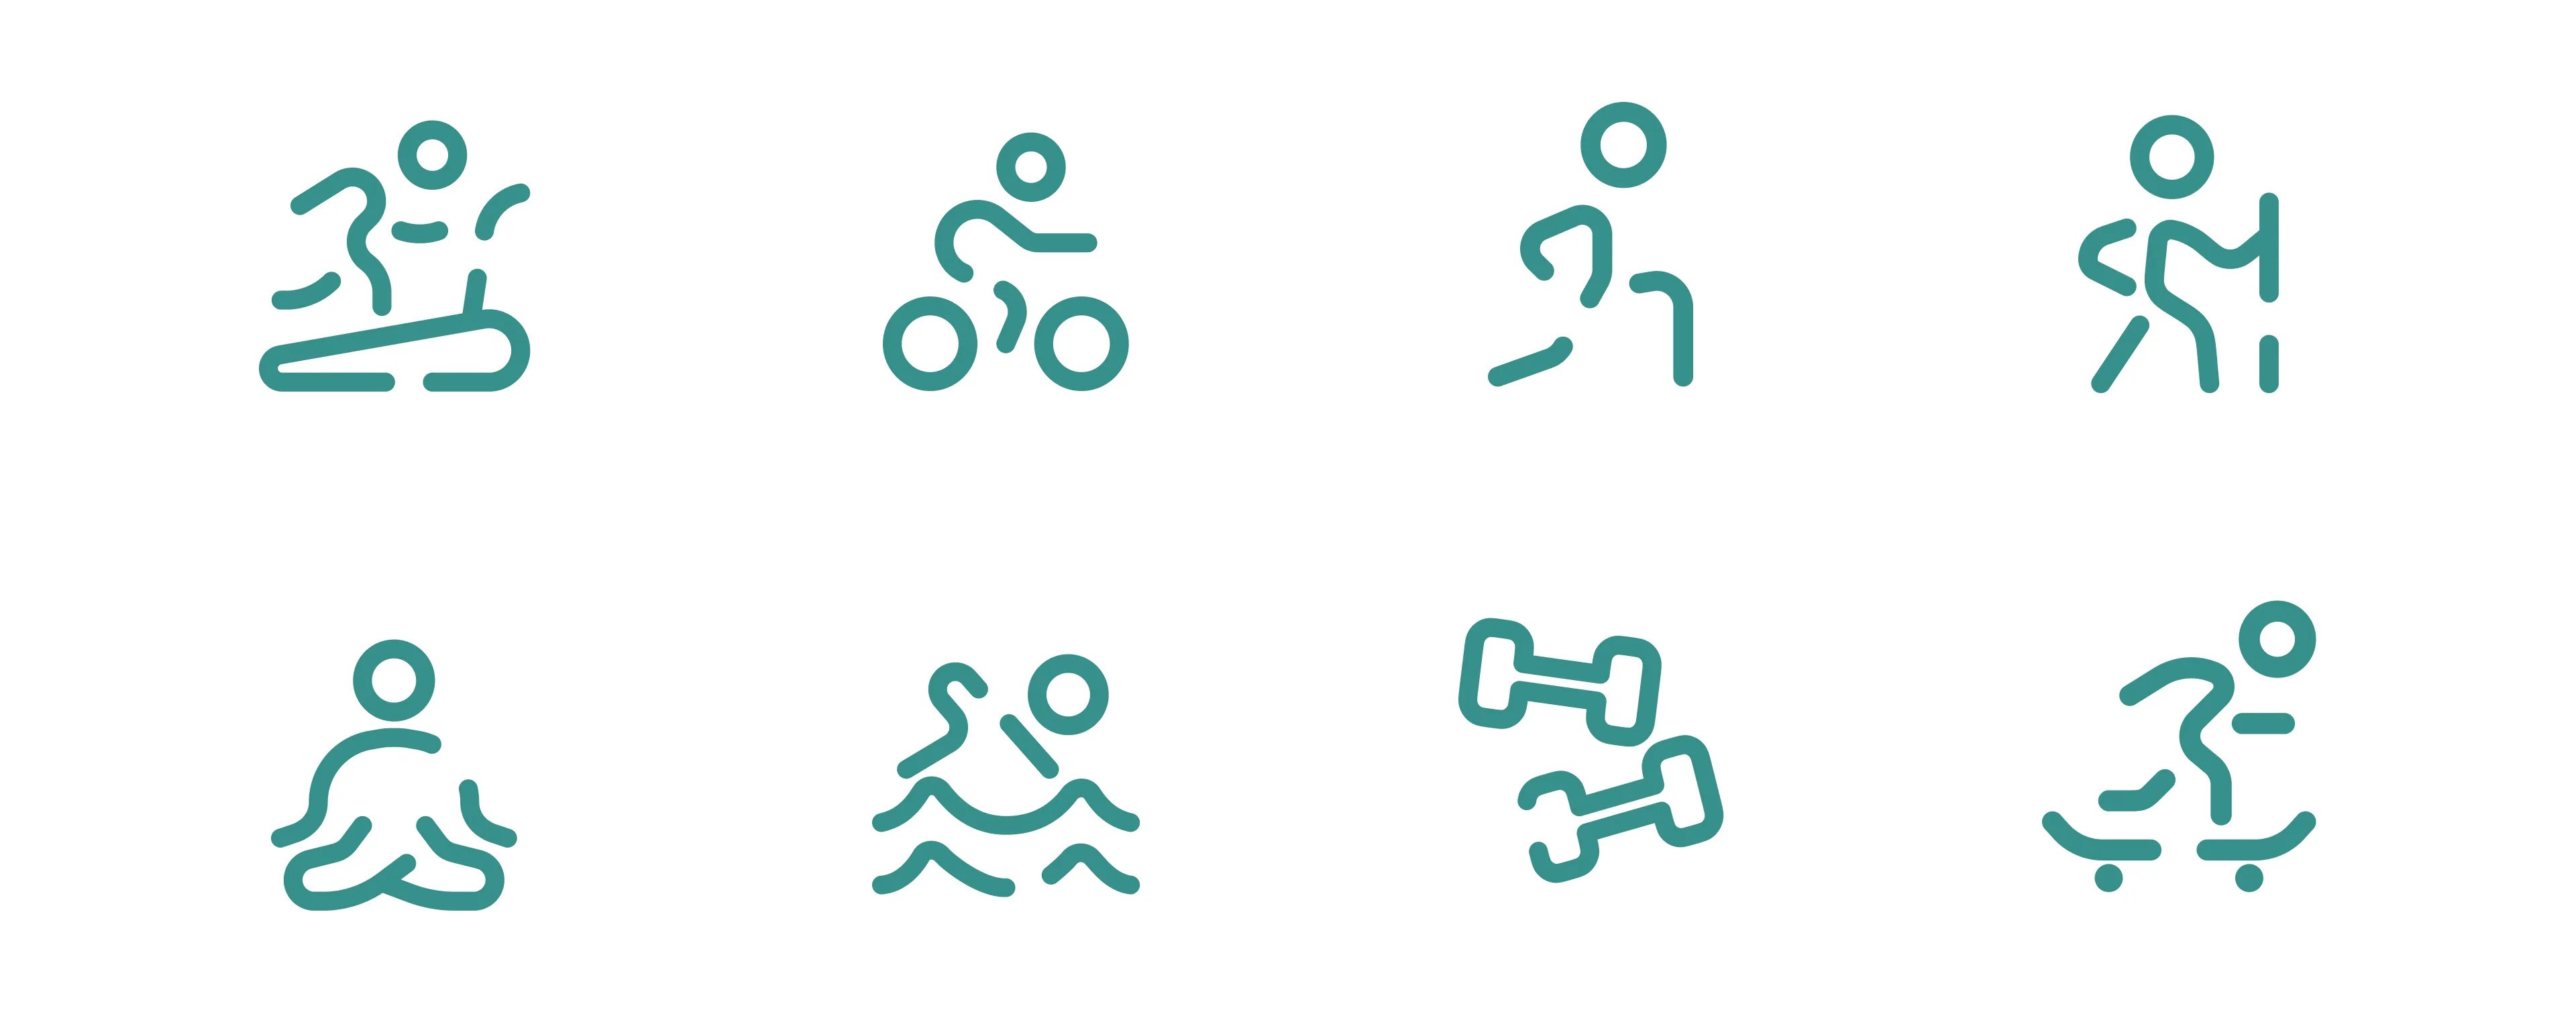 Some possible sports activities that the user can do